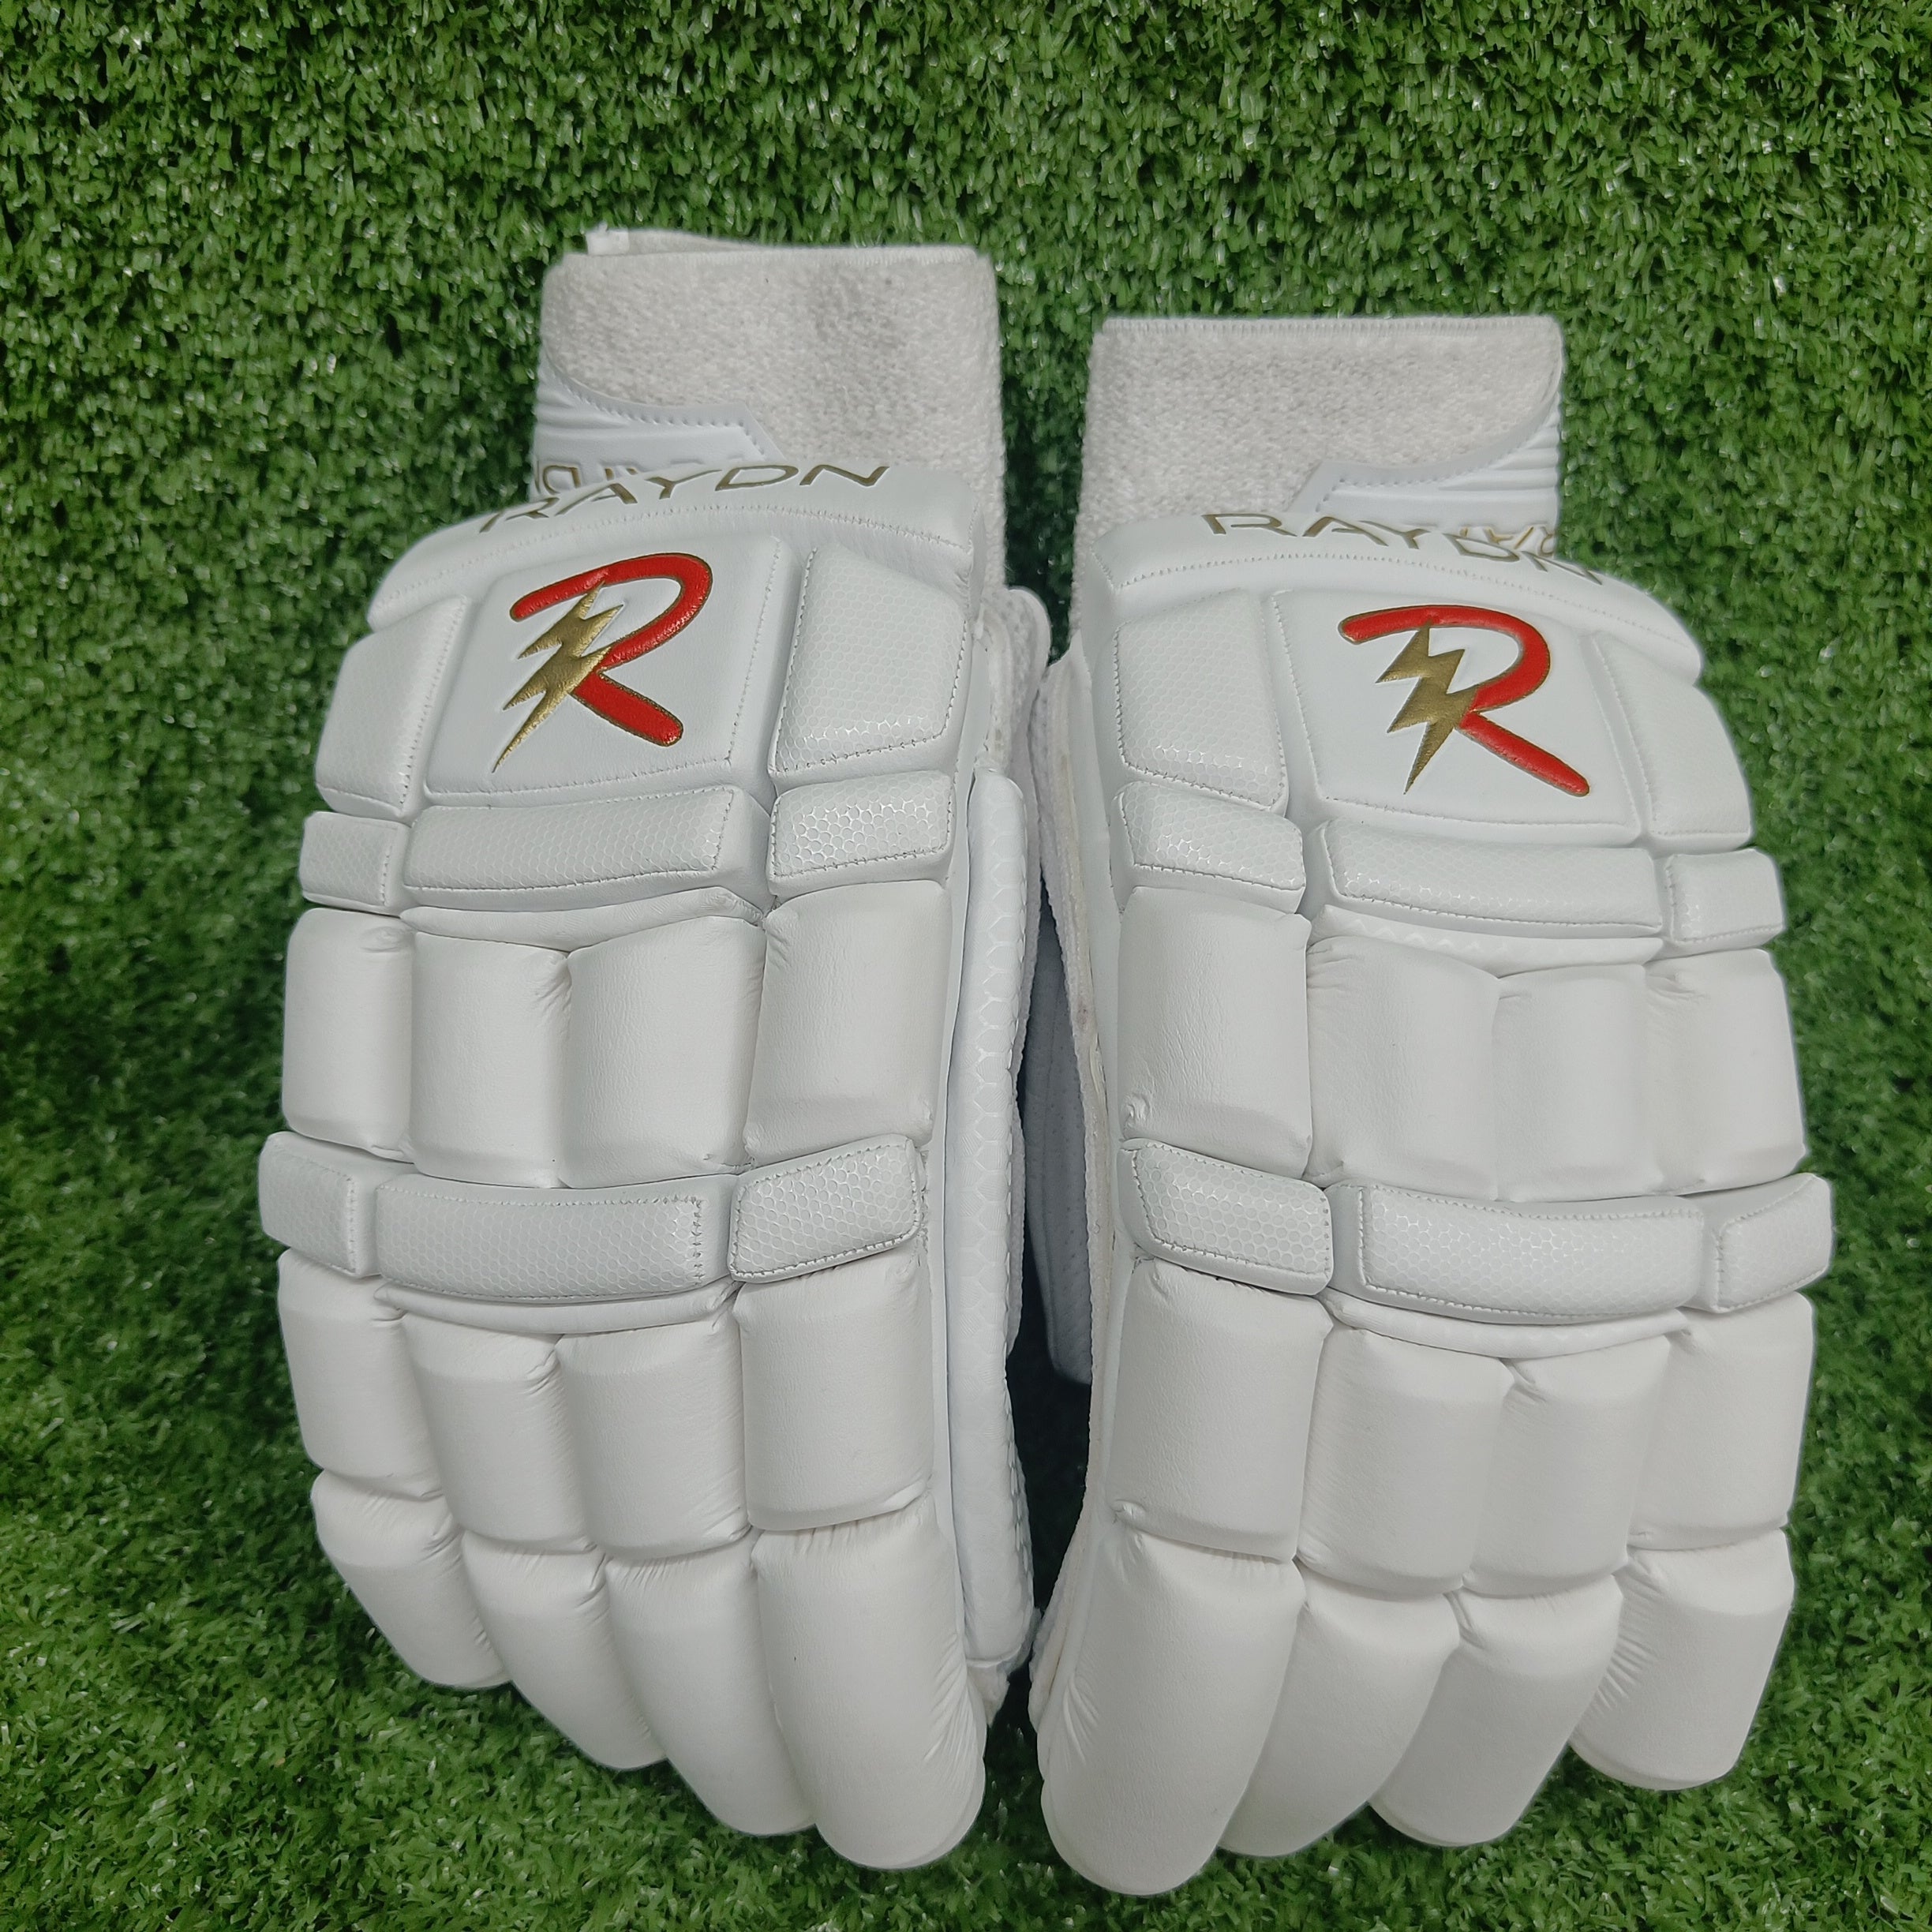 Raydn Players Edition Youth Cricket Batting Gloves (With Pittard) White / Navy Blue / Black